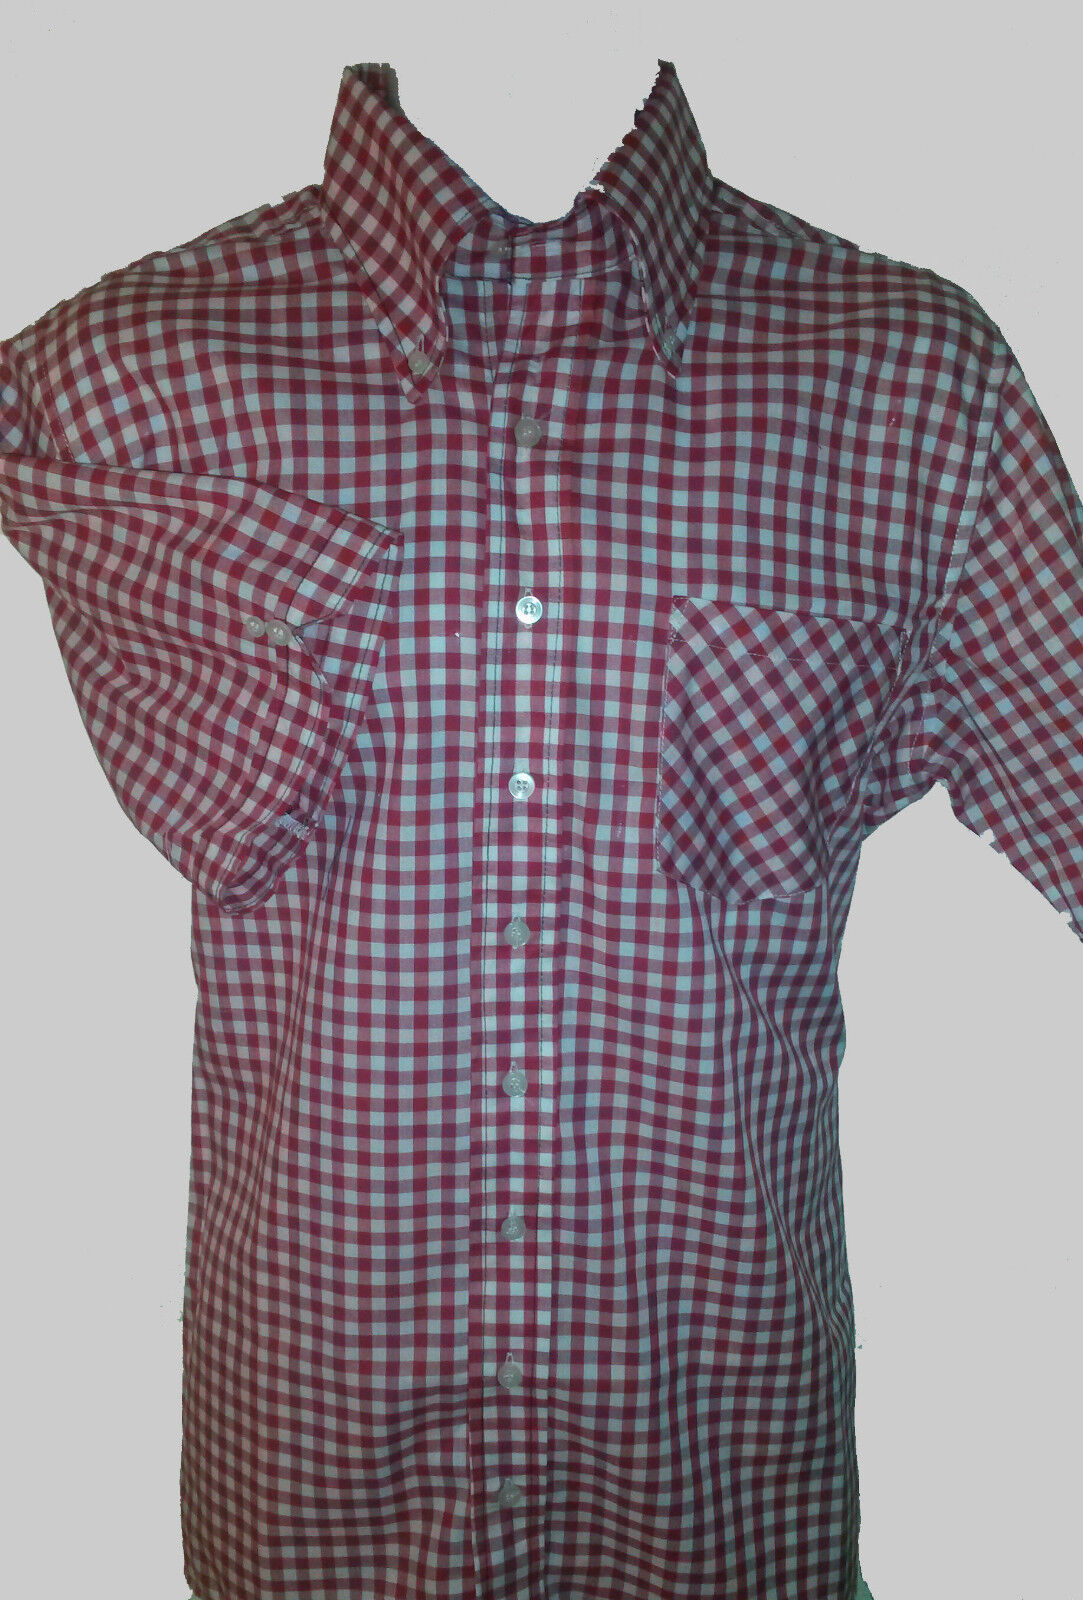 Primary image for NEW SM MODERNACTION Red Gingham Shirt Skinhead Lonsdale Perry Fred Sherman Ben